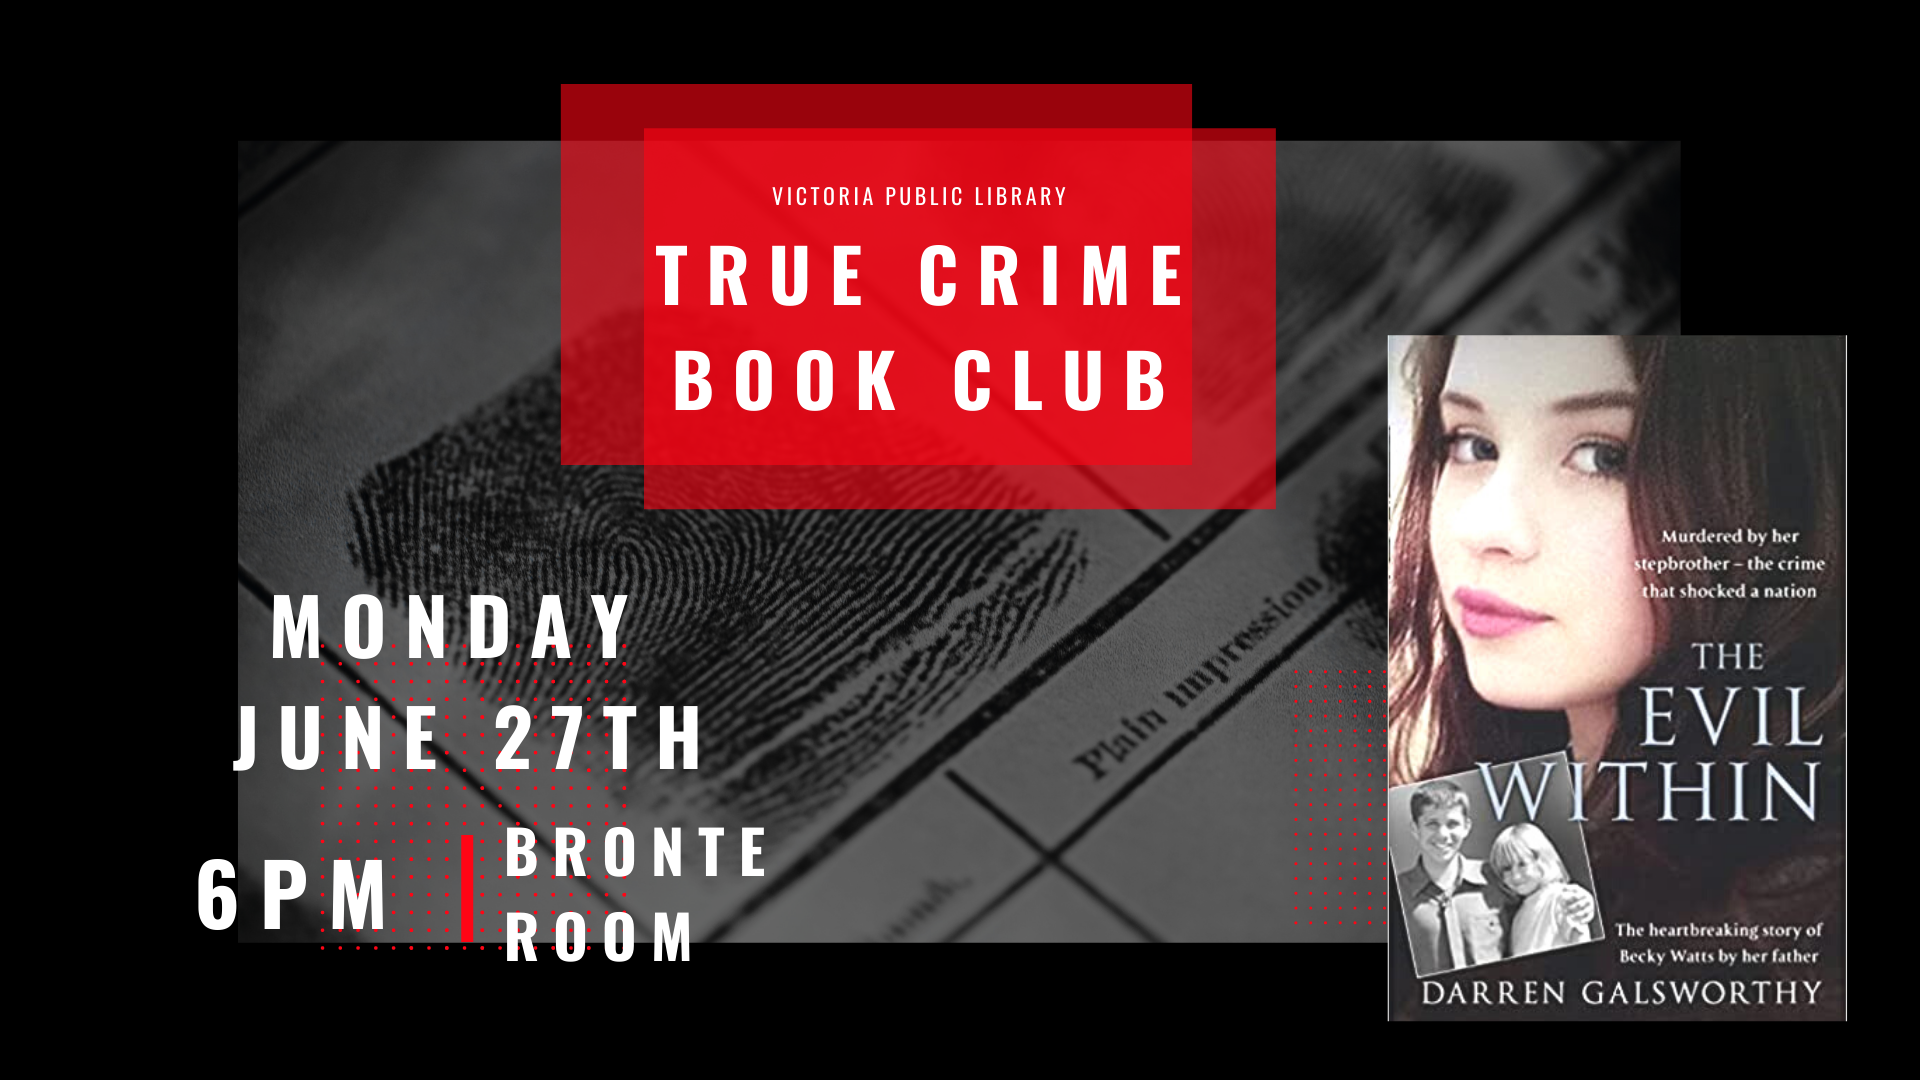 True Crime Book Club, June 27th at 6pm, The Evil Within by Darren Galsworthy